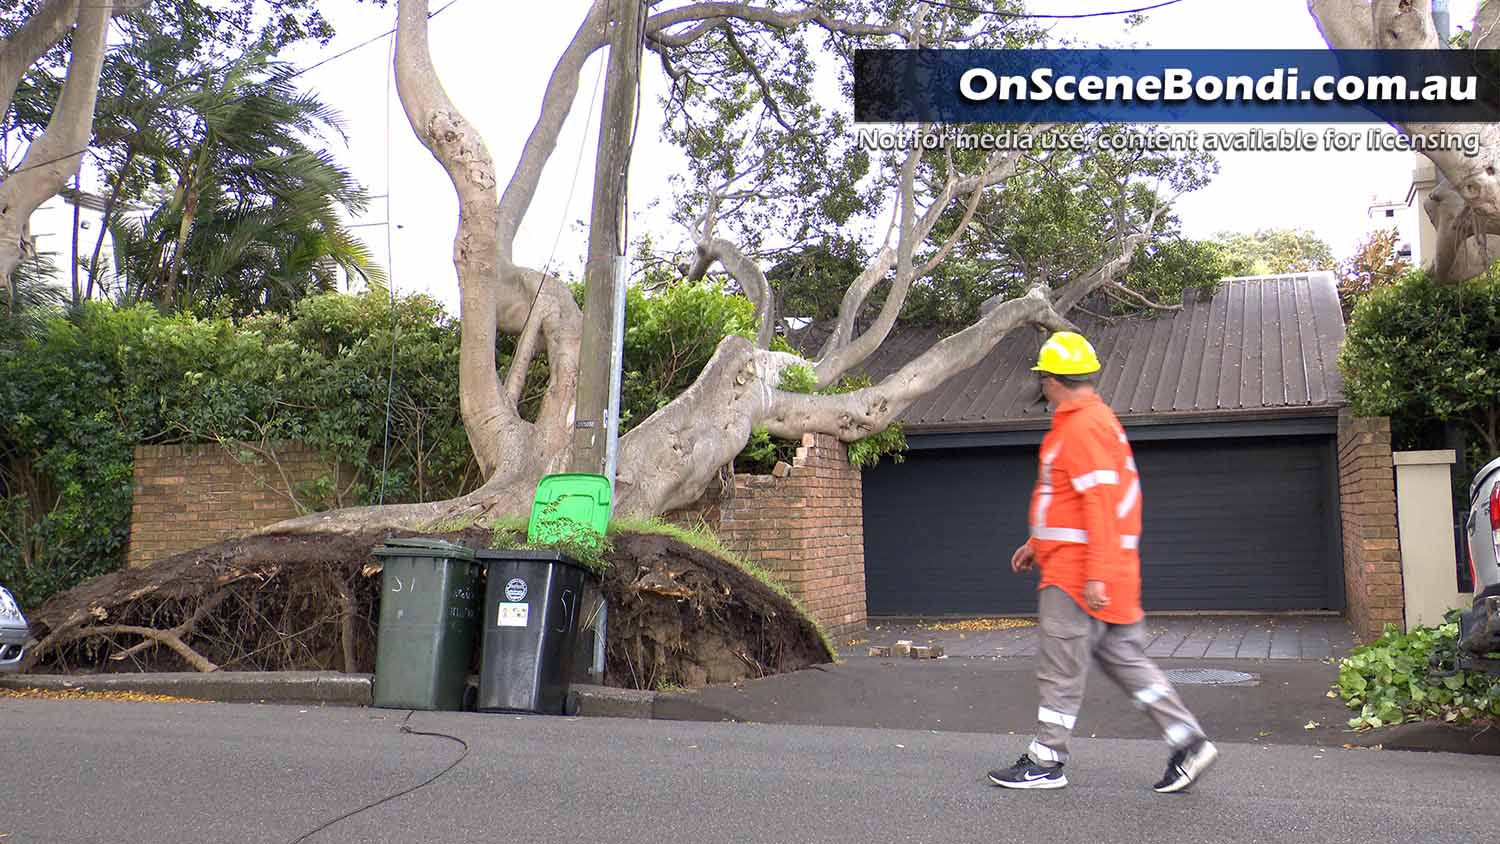 Strong winds send tree crashing into home in Bellevue Hill